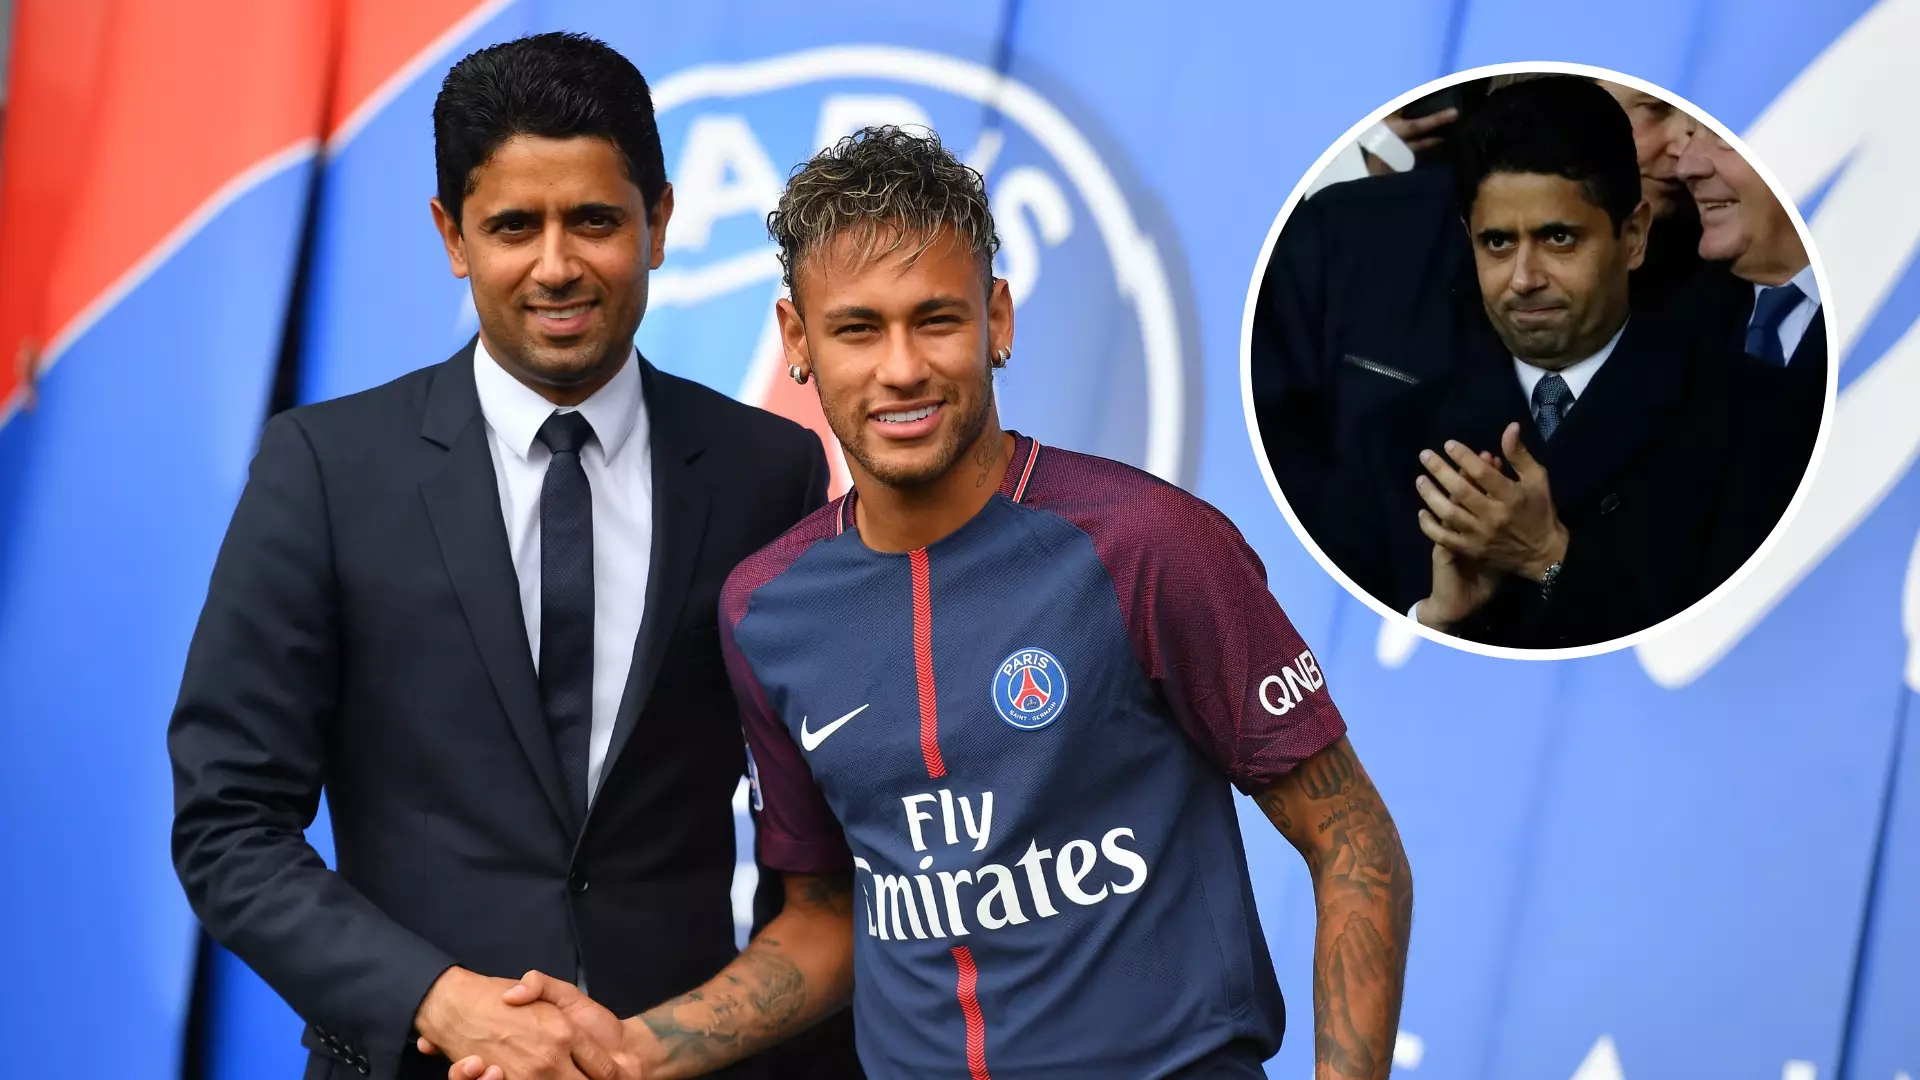 Neymar's Future At Risk As PSG President Nasser Al-Khelaifi Fires Out Warning To Players